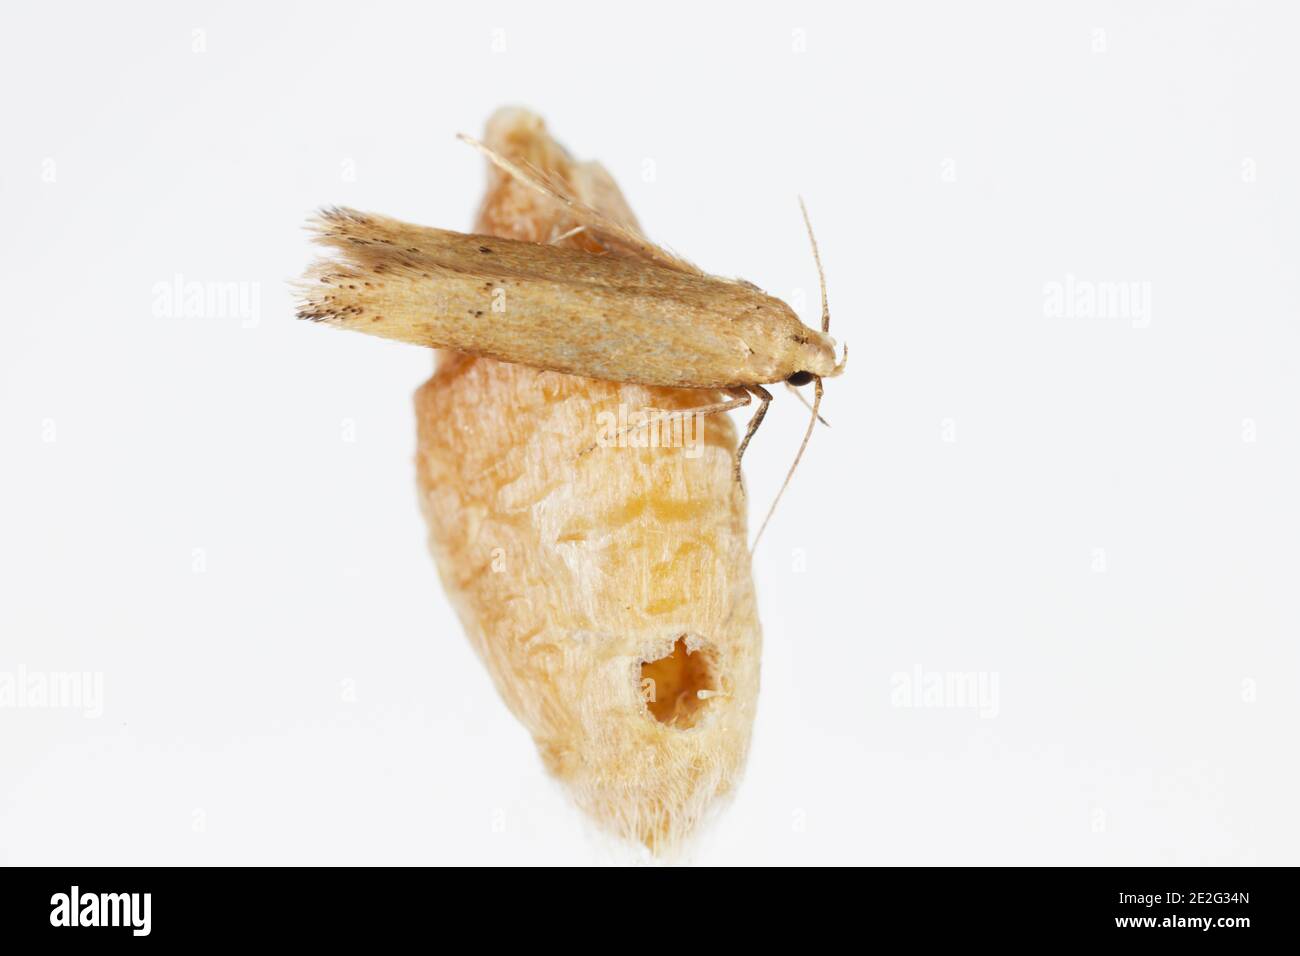 The Angoumois grain moth (Sitotroga cerealella) on damaged kernel. It is an important pest of stored grains of cereals, maize, rice and others Stock Photo